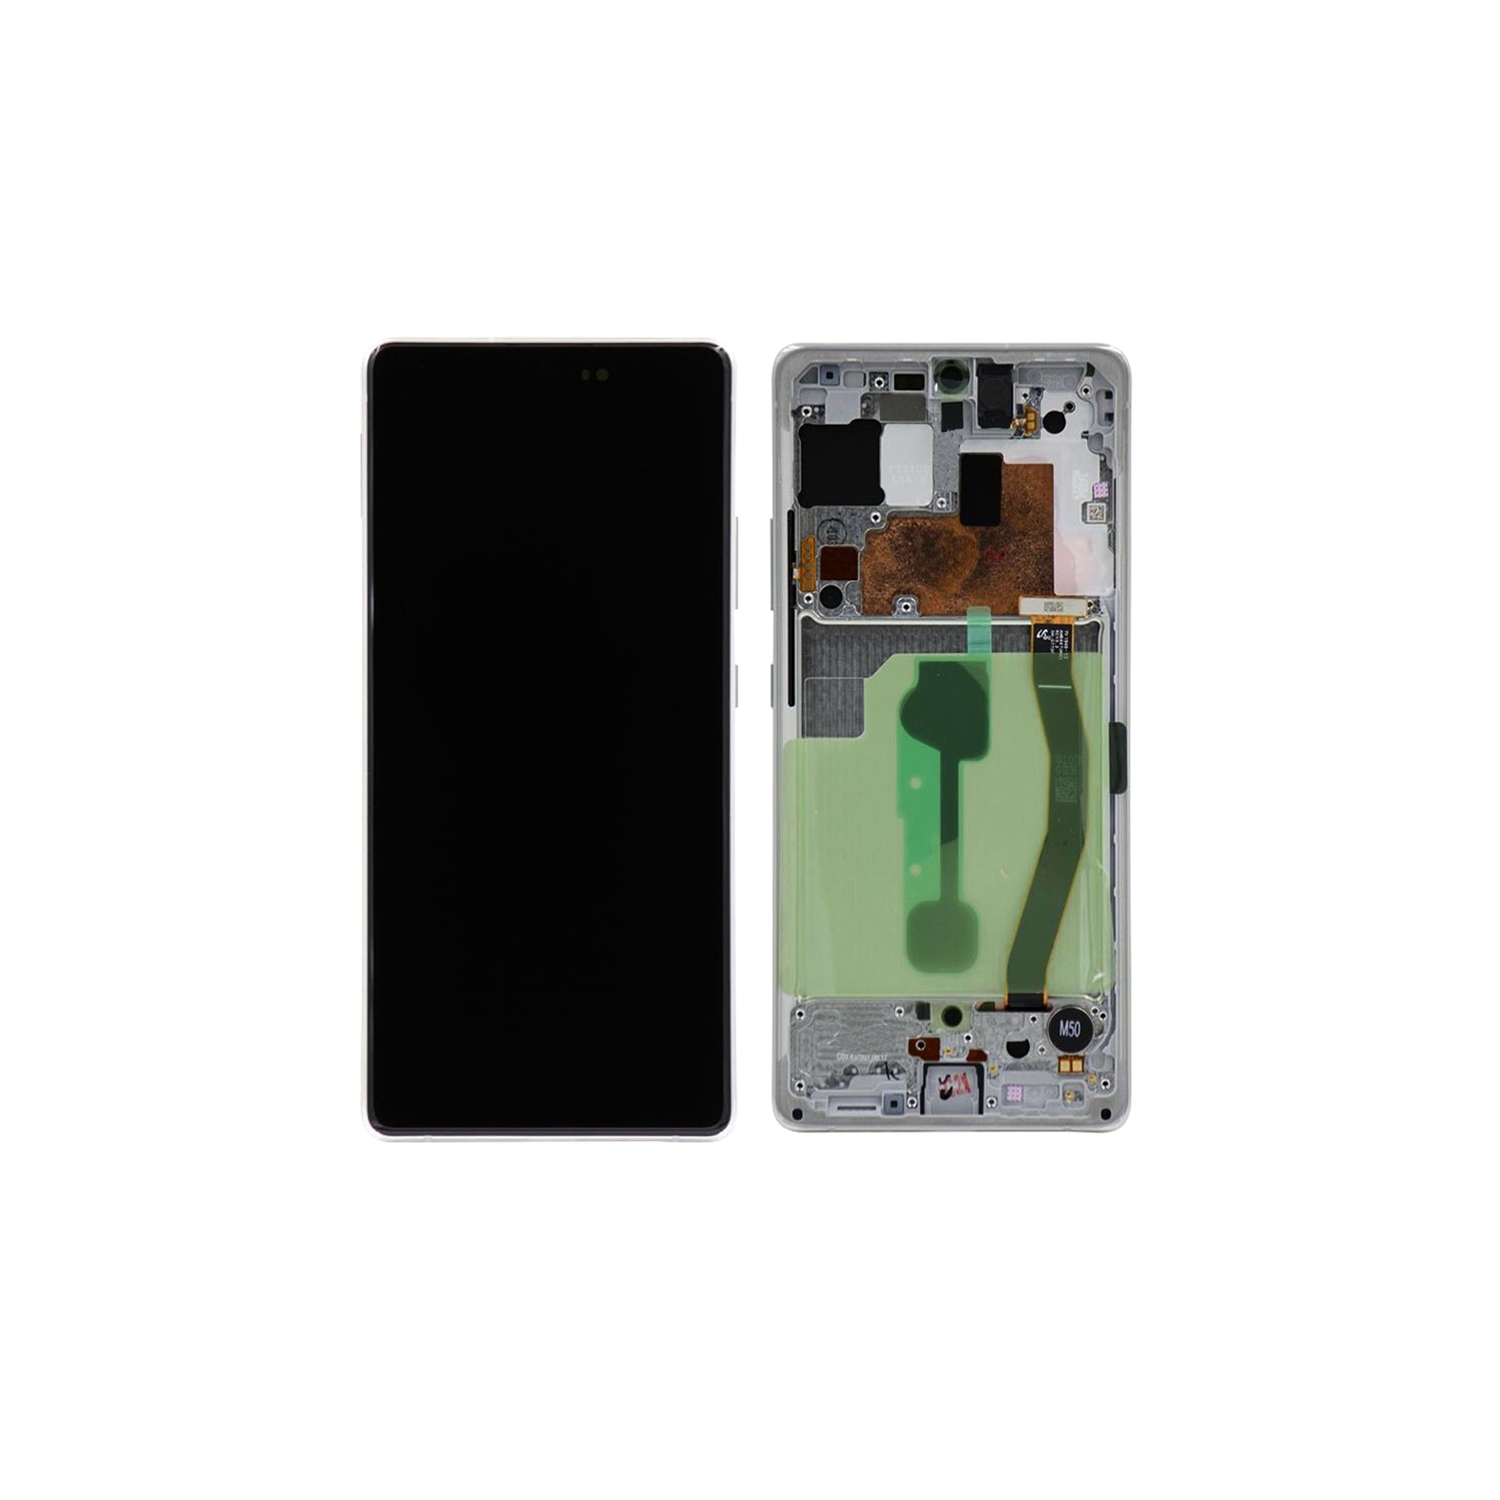 Refurbished (Excellent) - LCD Display Touch Screen Digitizer Assembly + Frame For Samsung Galaxy S10 Lite (SM-G770F) - Prism White